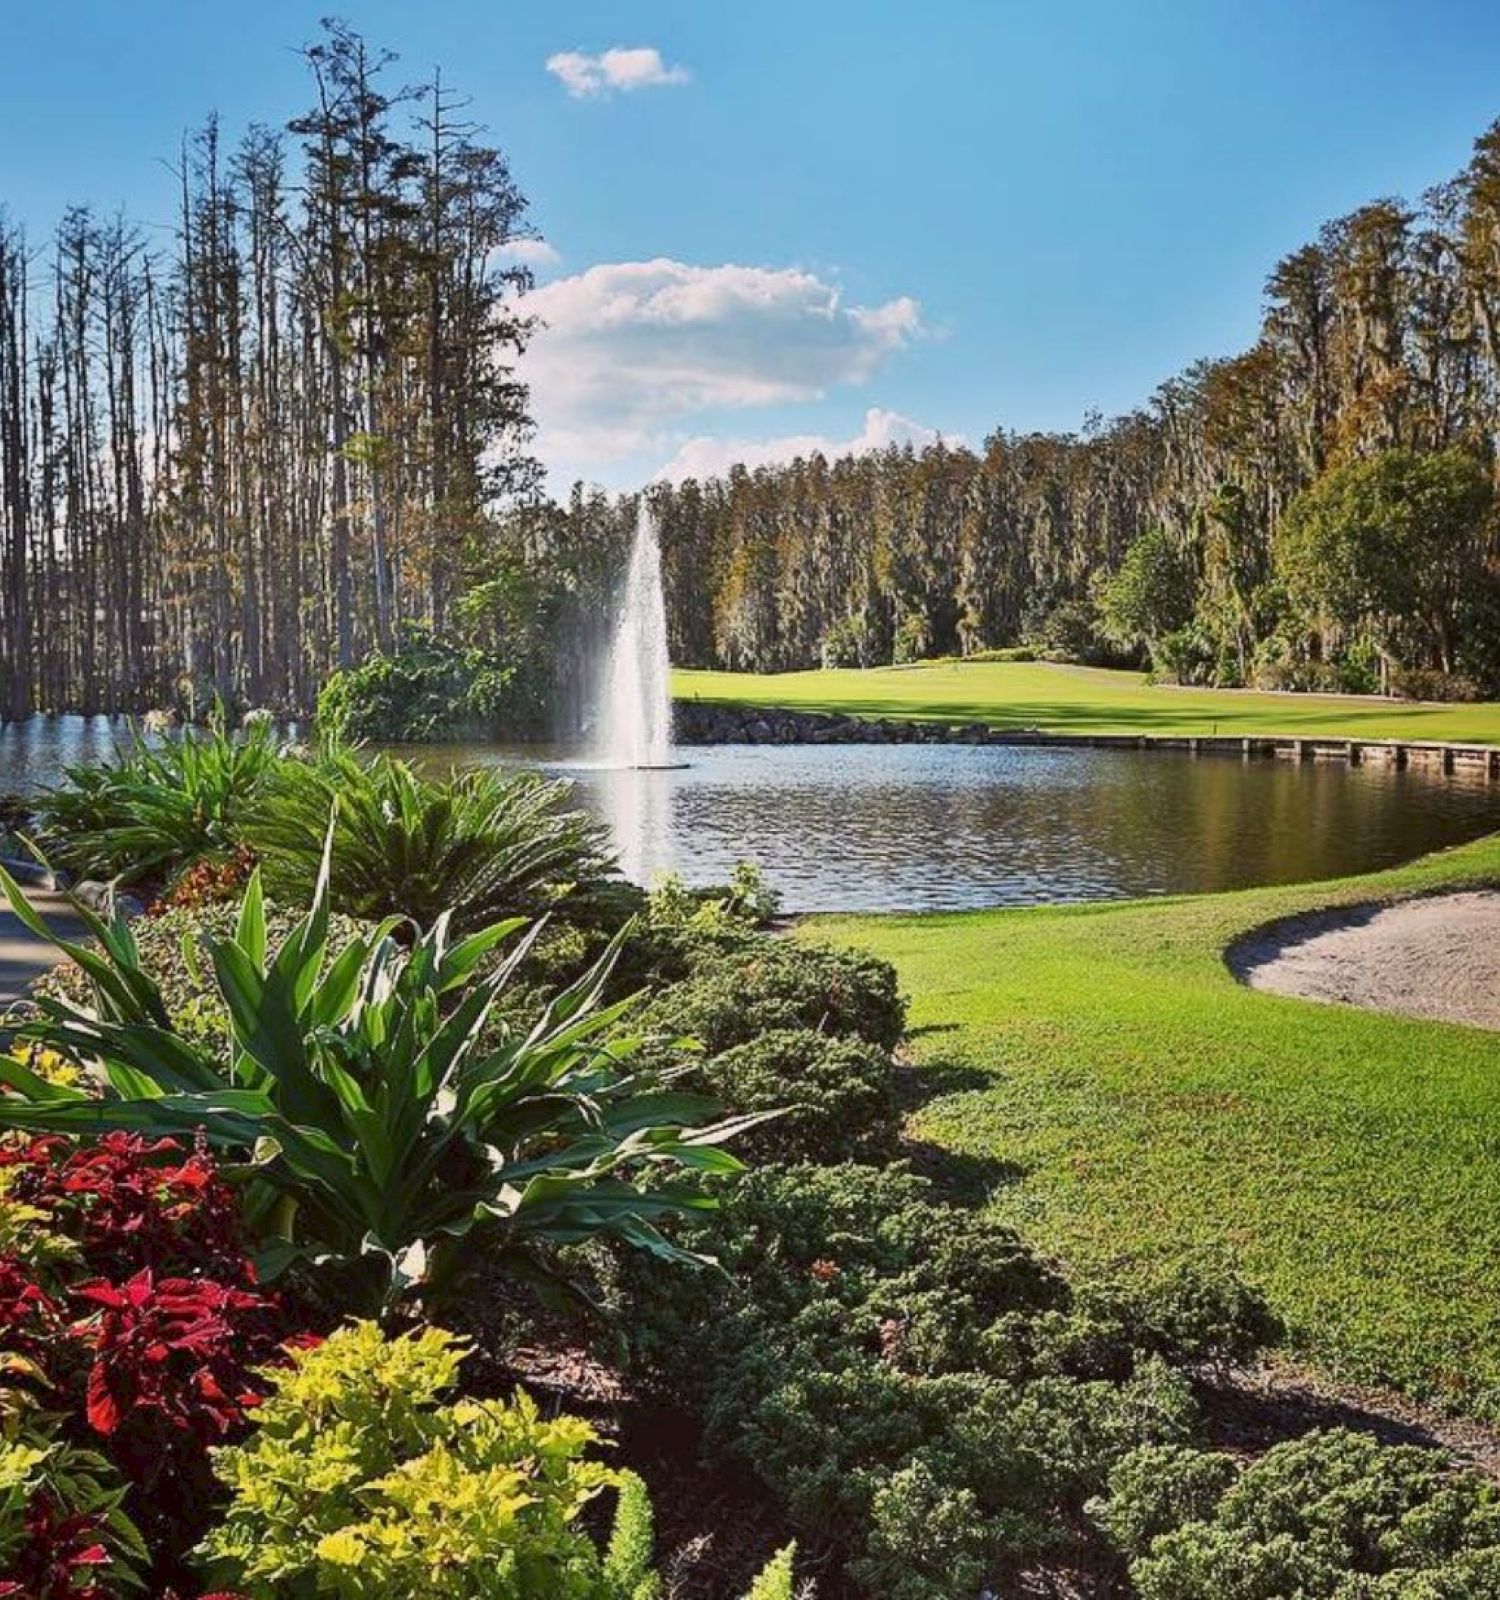 This image shows a landscaped garden with colorful flowers, a pond with a fountain, and a backdrop of trees under a blue sky with scattered clouds.